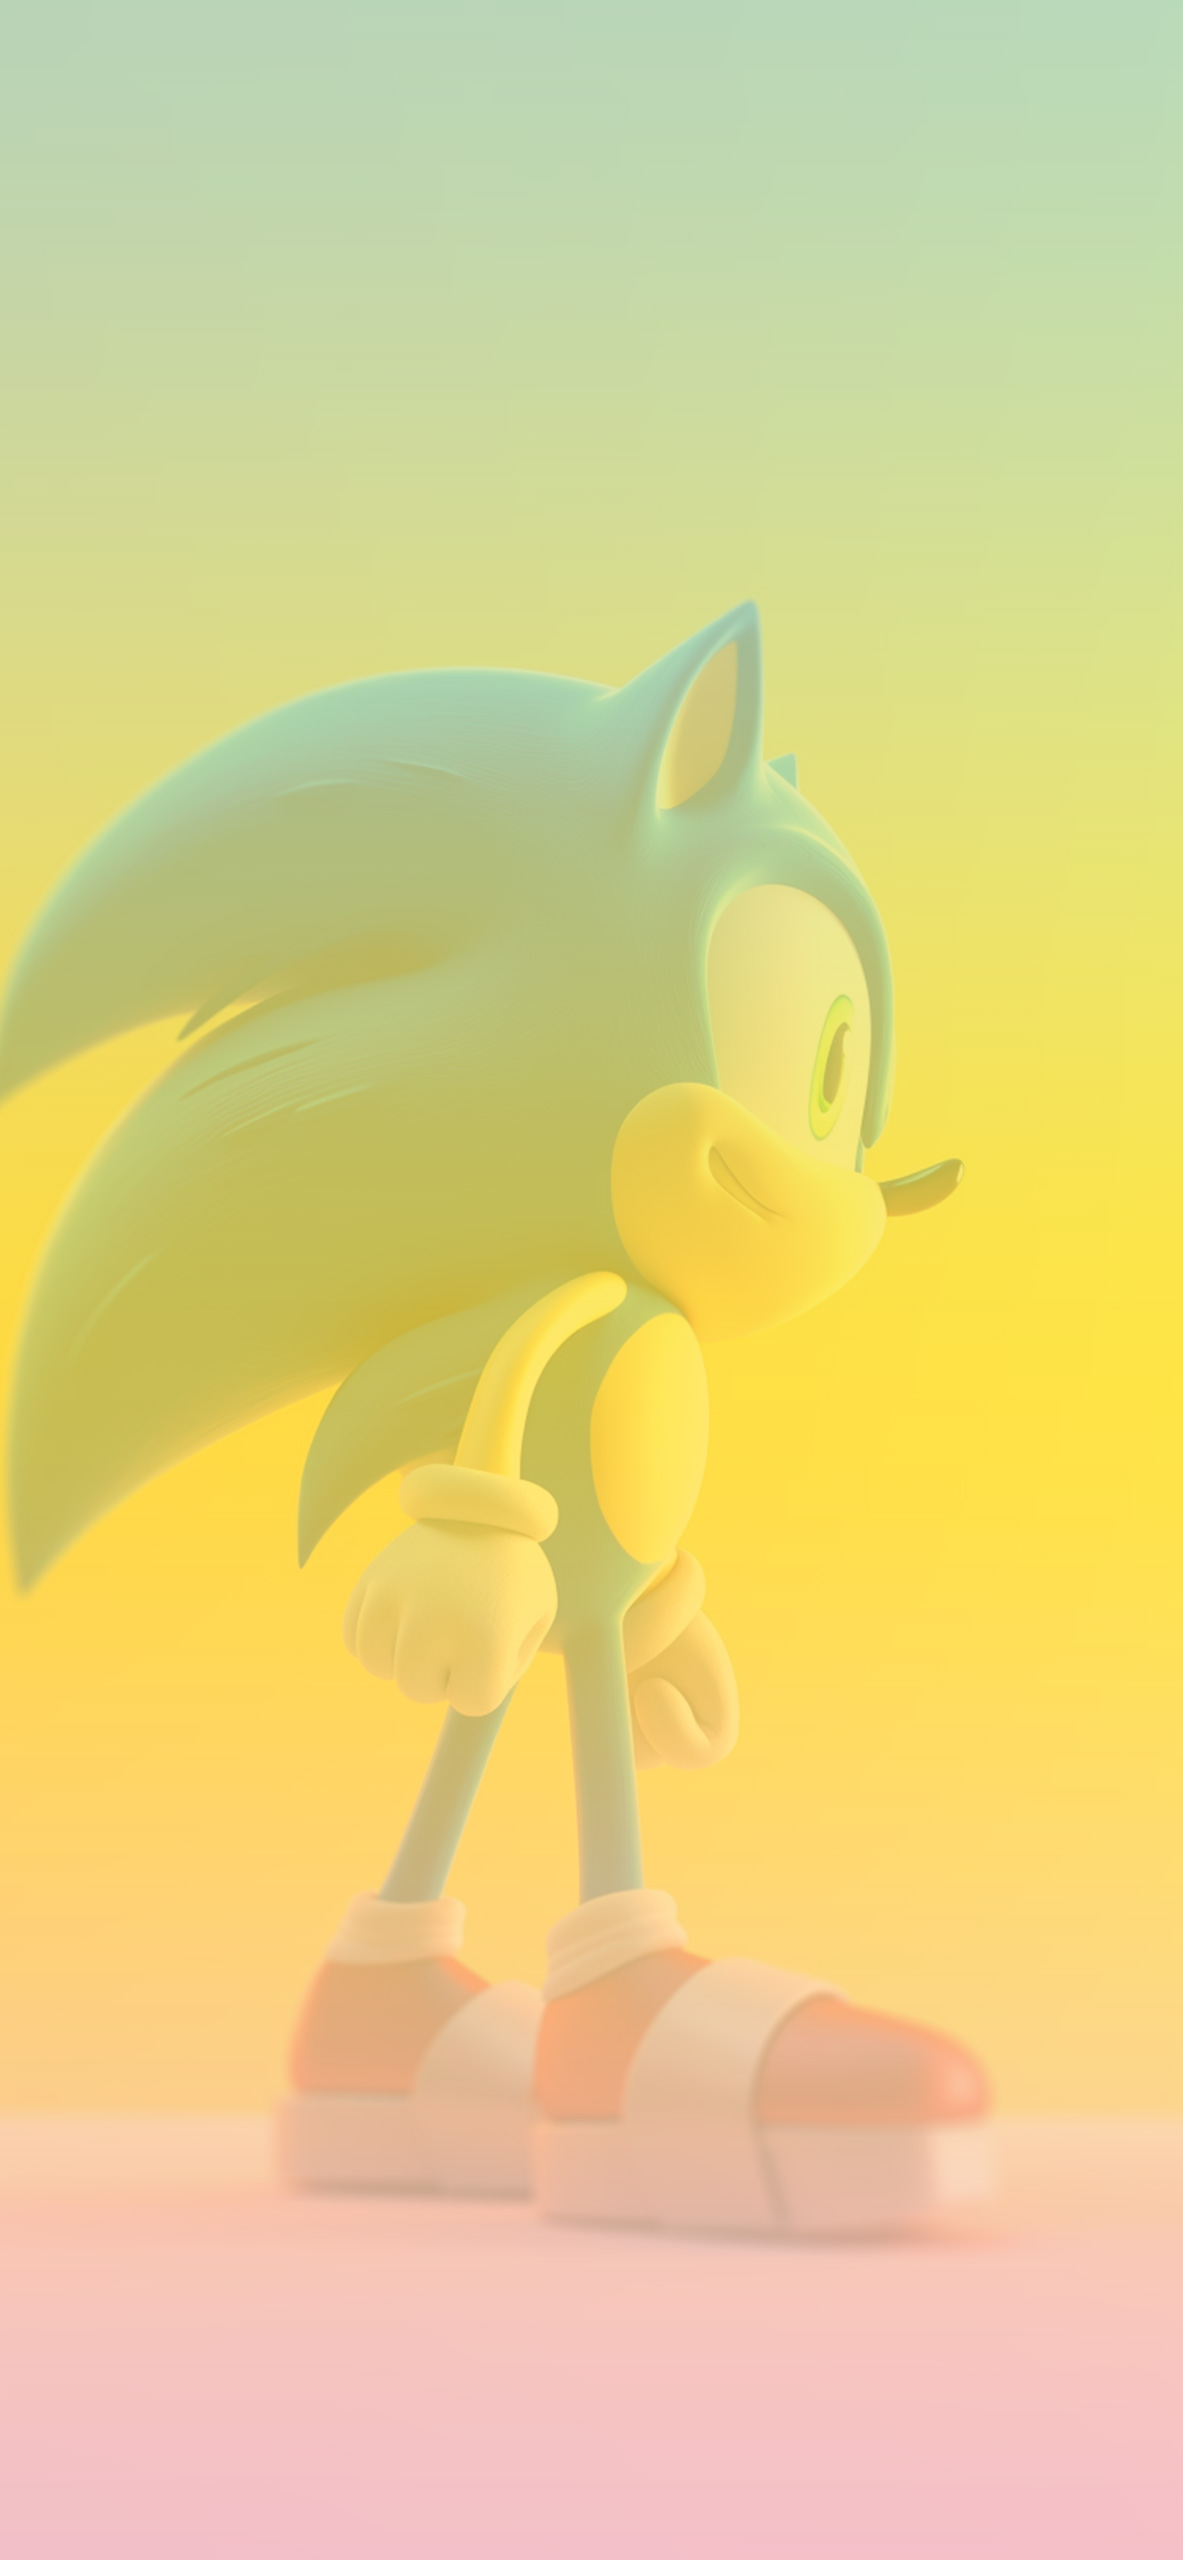 sonic the hedgehog yellow background